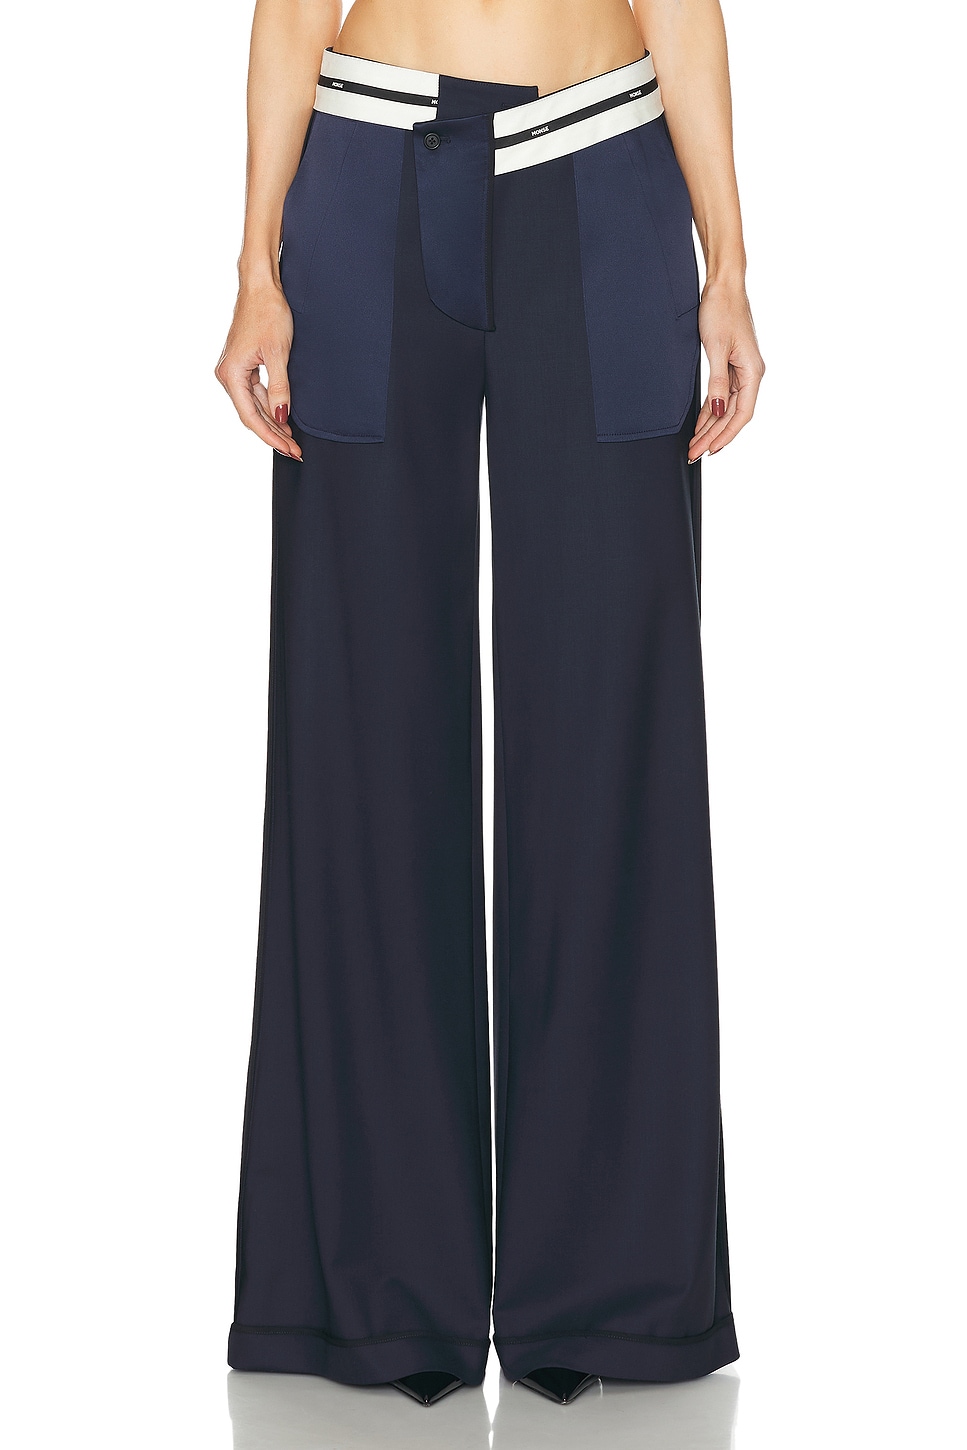 Image 1 of Monse Inside Out Tailored Trouser in Midnight